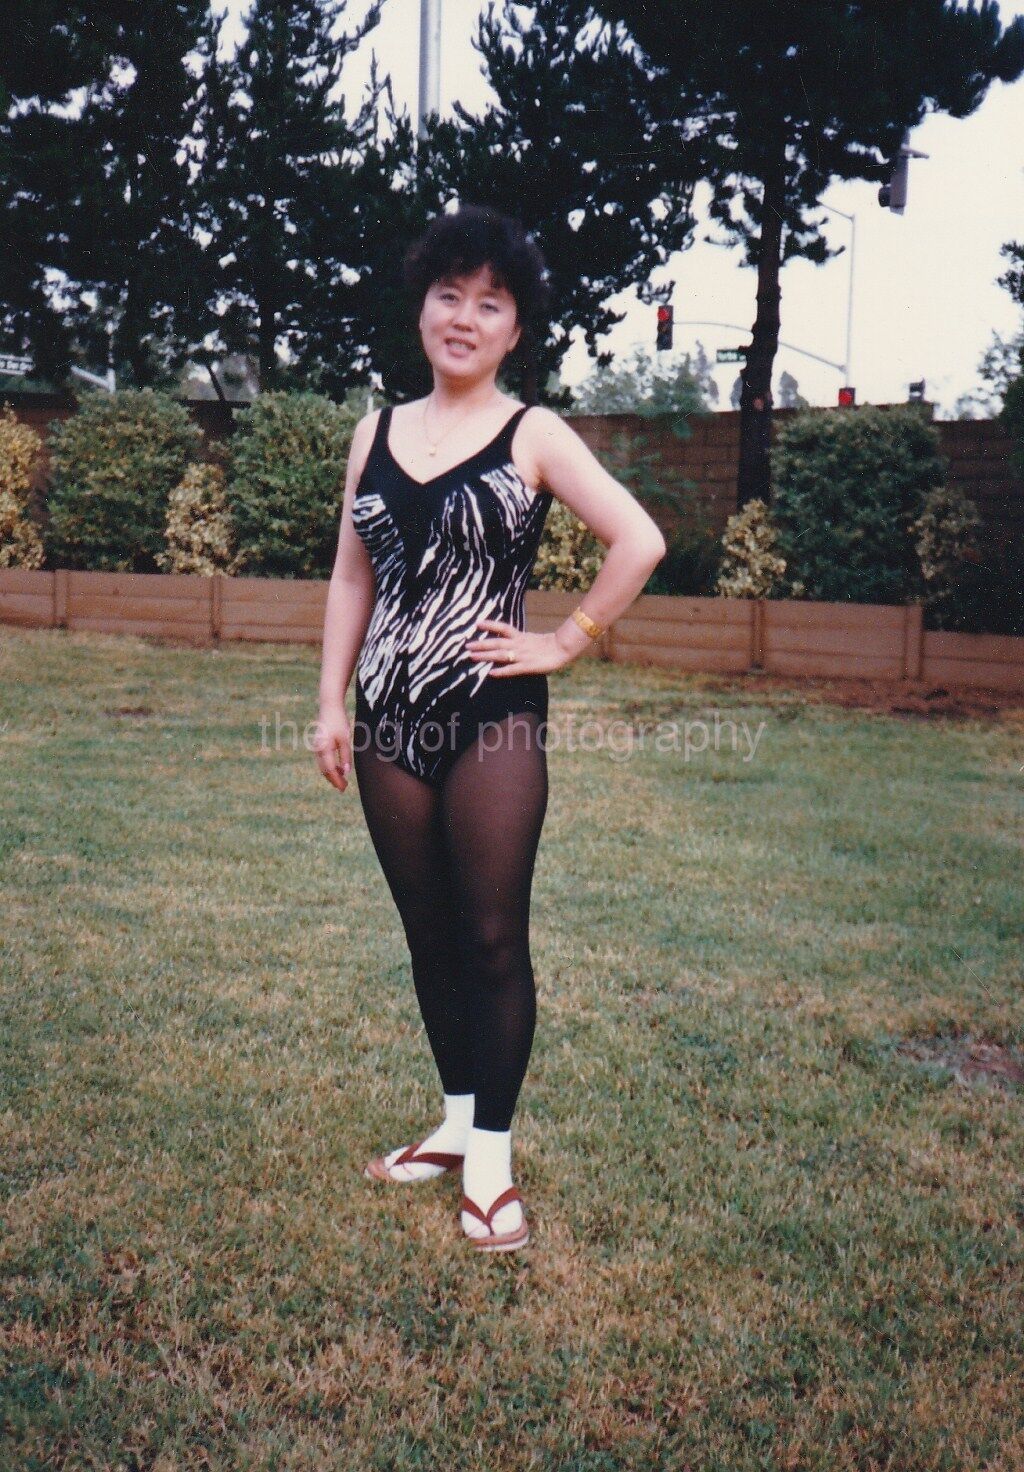 WOMAN IN TIGHTS Backyard Portrait FOUND Photo Poster paintingGRAPH Color810 14 K